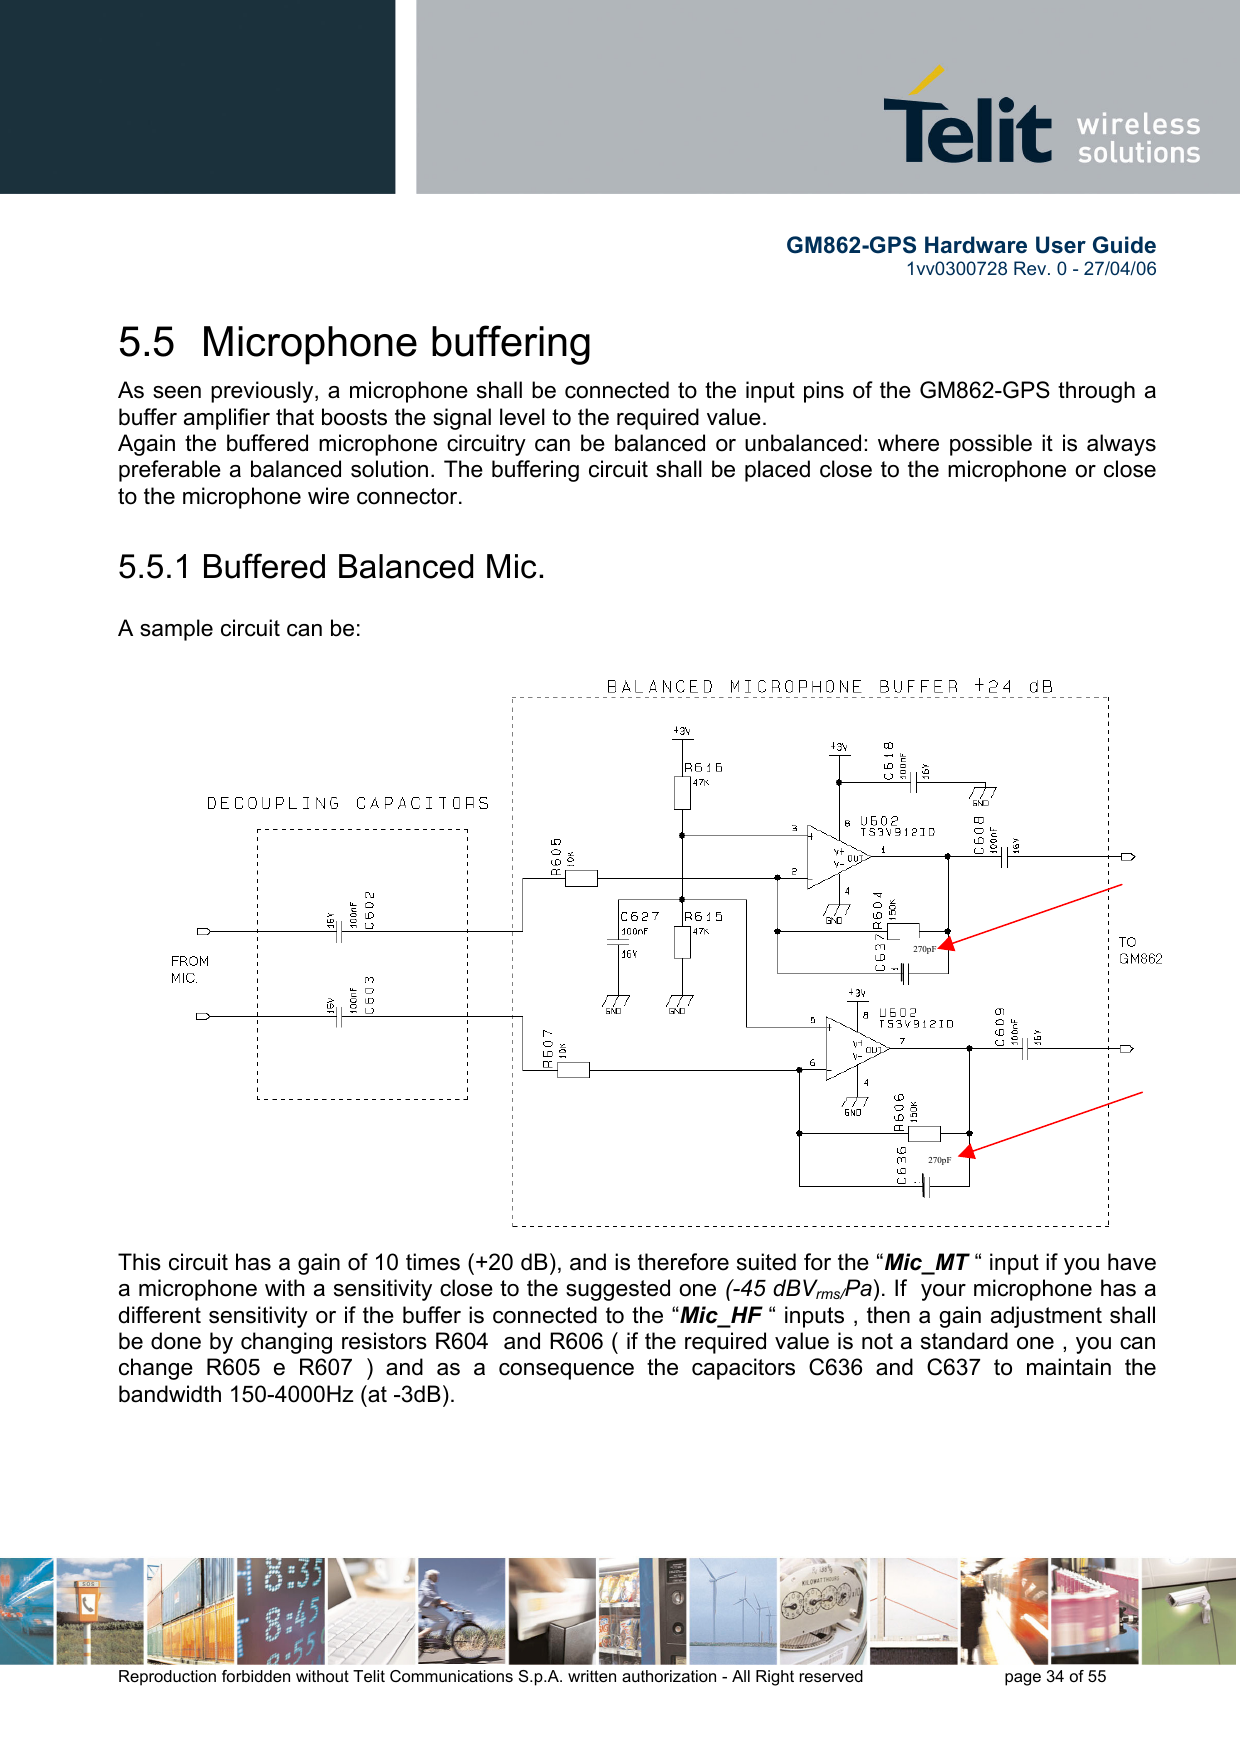        GM862-GPS Hardware User Guide   1vv0300728 Rev. 0 - 27/04/06    Reproduction forbidden without Telit Communications S.p.A. written authorization - All Right reserved    page 34 of 55  5.5 Microphone buffering As seen previously, a microphone shall be connected to the input pins of the GM862-GPS through a buffer amplifier that boosts the signal level to the required value. Again the buffered microphone circuitry can be balanced or unbalanced: where possible it is always preferable a balanced solution. The buffering circuit shall be placed close to the microphone or close to the microphone wire connector. 5.5.1 Buffered Balanced Mic.  A sample circuit can be: This circuit has a gain of 10 times (+20 dB), and is therefore suited for the “Mic_MT “ input if you have a microphone with a sensitivity close to the suggested one (-45 dBVrms/Pa). If  your microphone has a different sensitivity or if the buffer is connected to the “Mic_HF “ inputs , then a gain adjustment shall be done by changing resistors R604  and R606 ( if the required value is not a standard one , you can change R605 e R607 ) and as a consequence the capacitors C636 and C637 to maintain the bandwidth 150-4000Hz (at -3dB).  270pF  270pF 